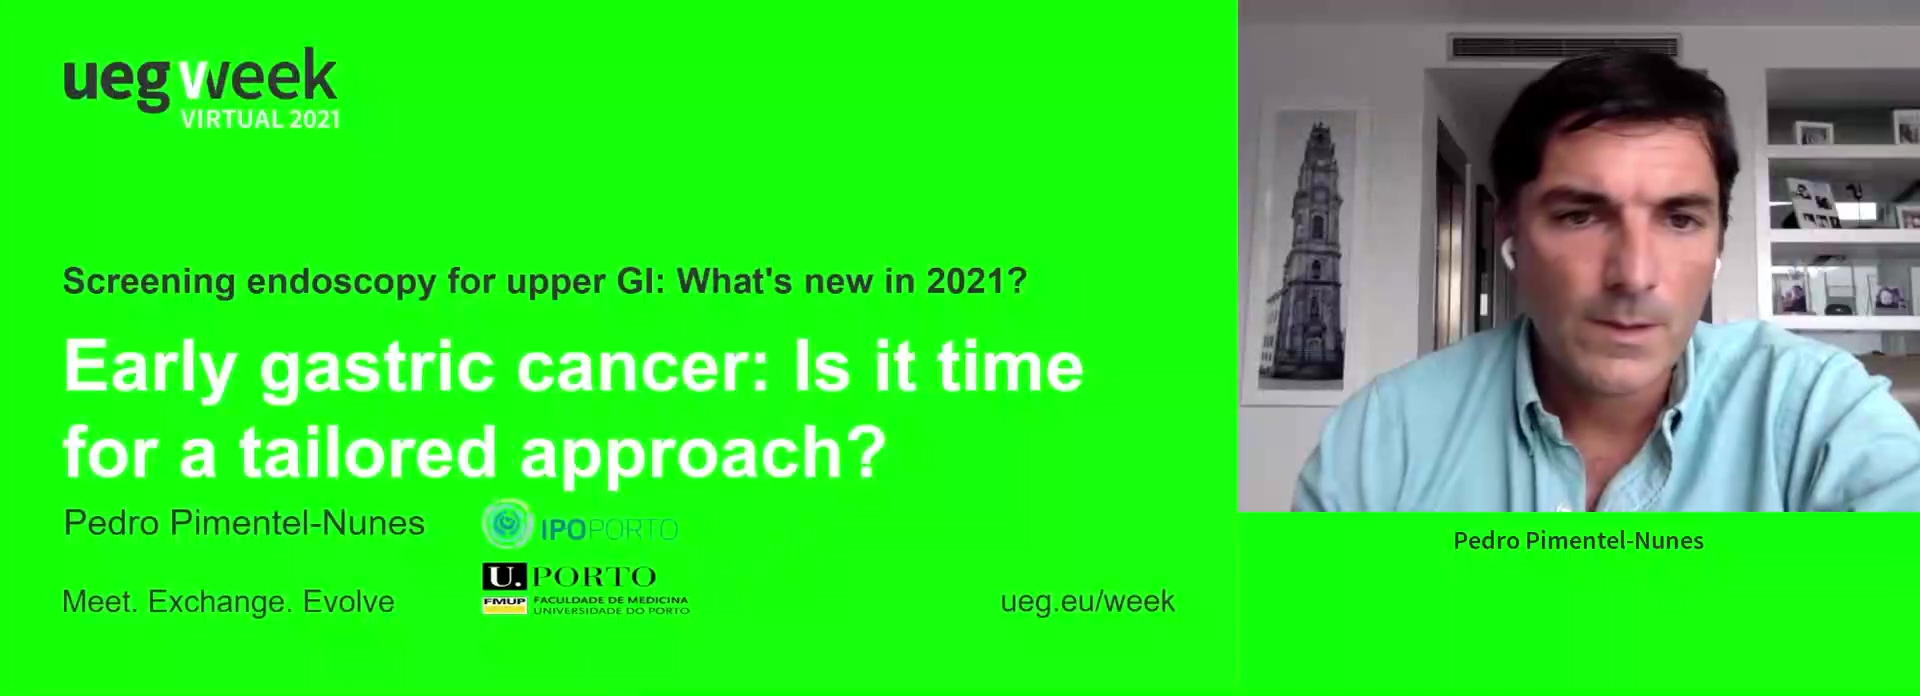 Early gastric cancer: Is it time for a tailored approach?